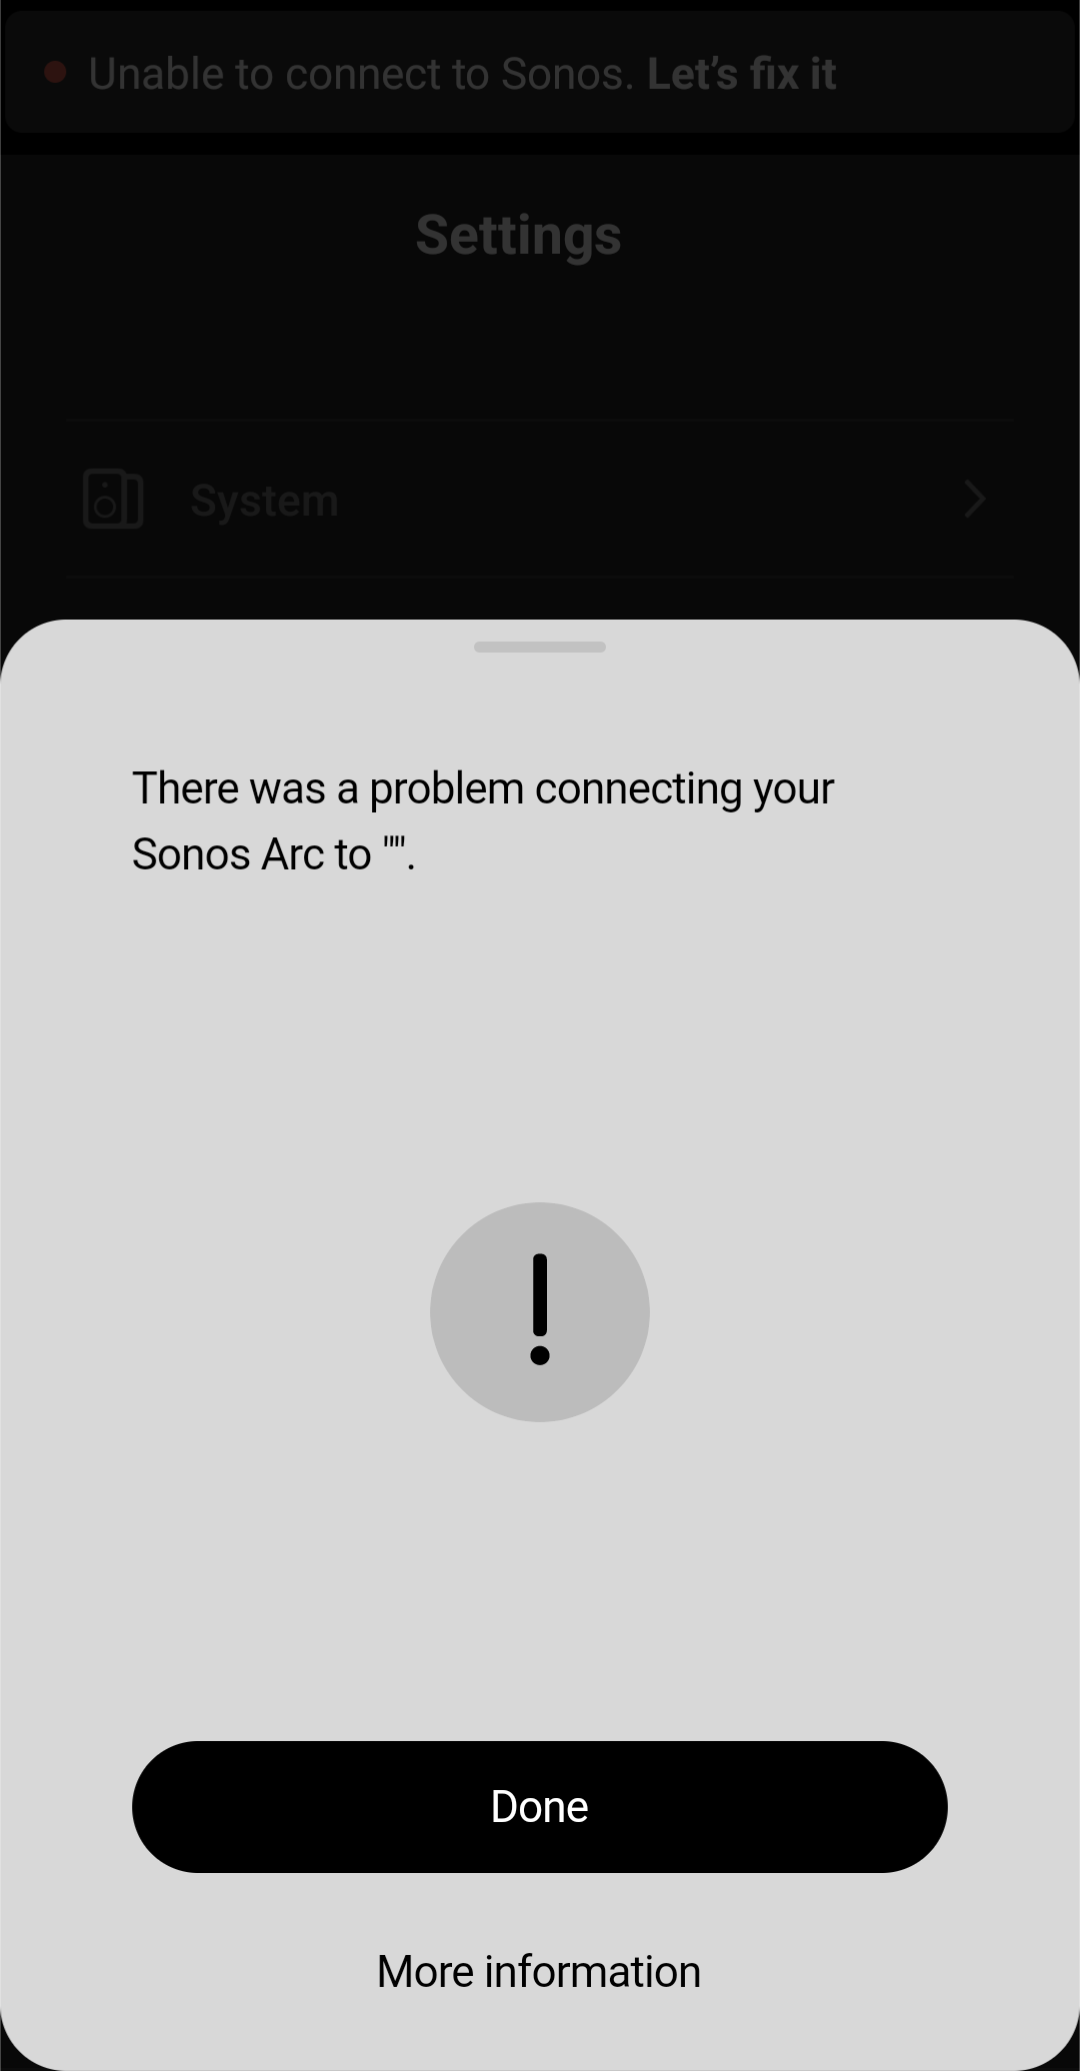 Rindende bælte lufthavn unable to connect arc to wifi after new router | Sonos Community